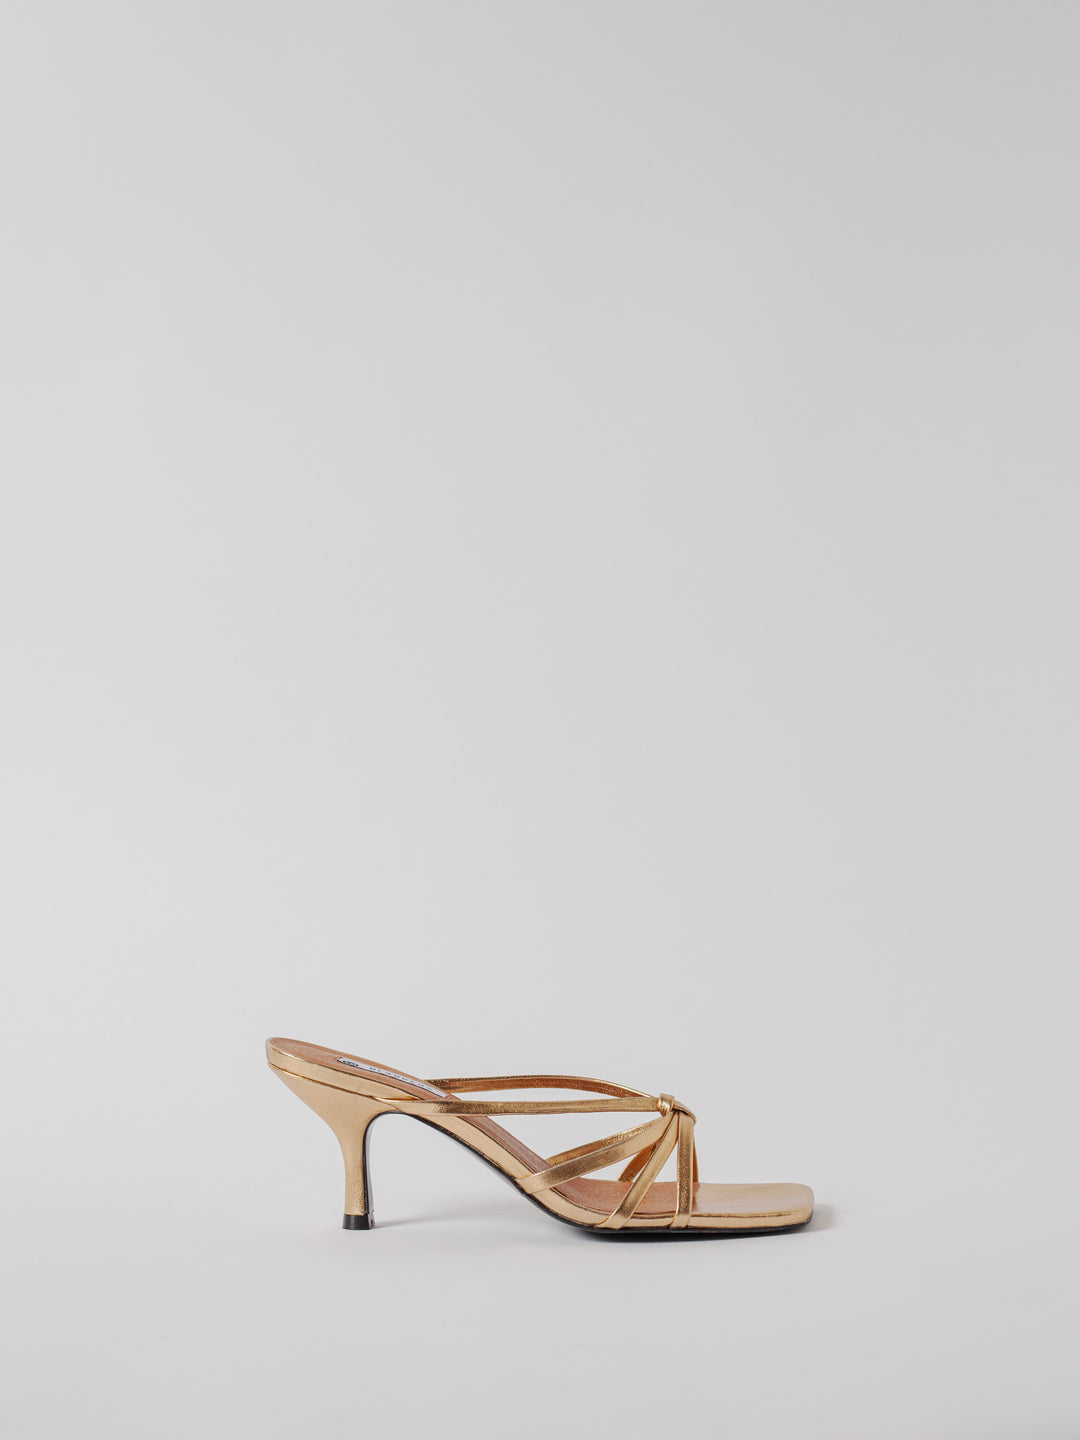 Blankens The Jennie Gold heeled sandal in gold leather